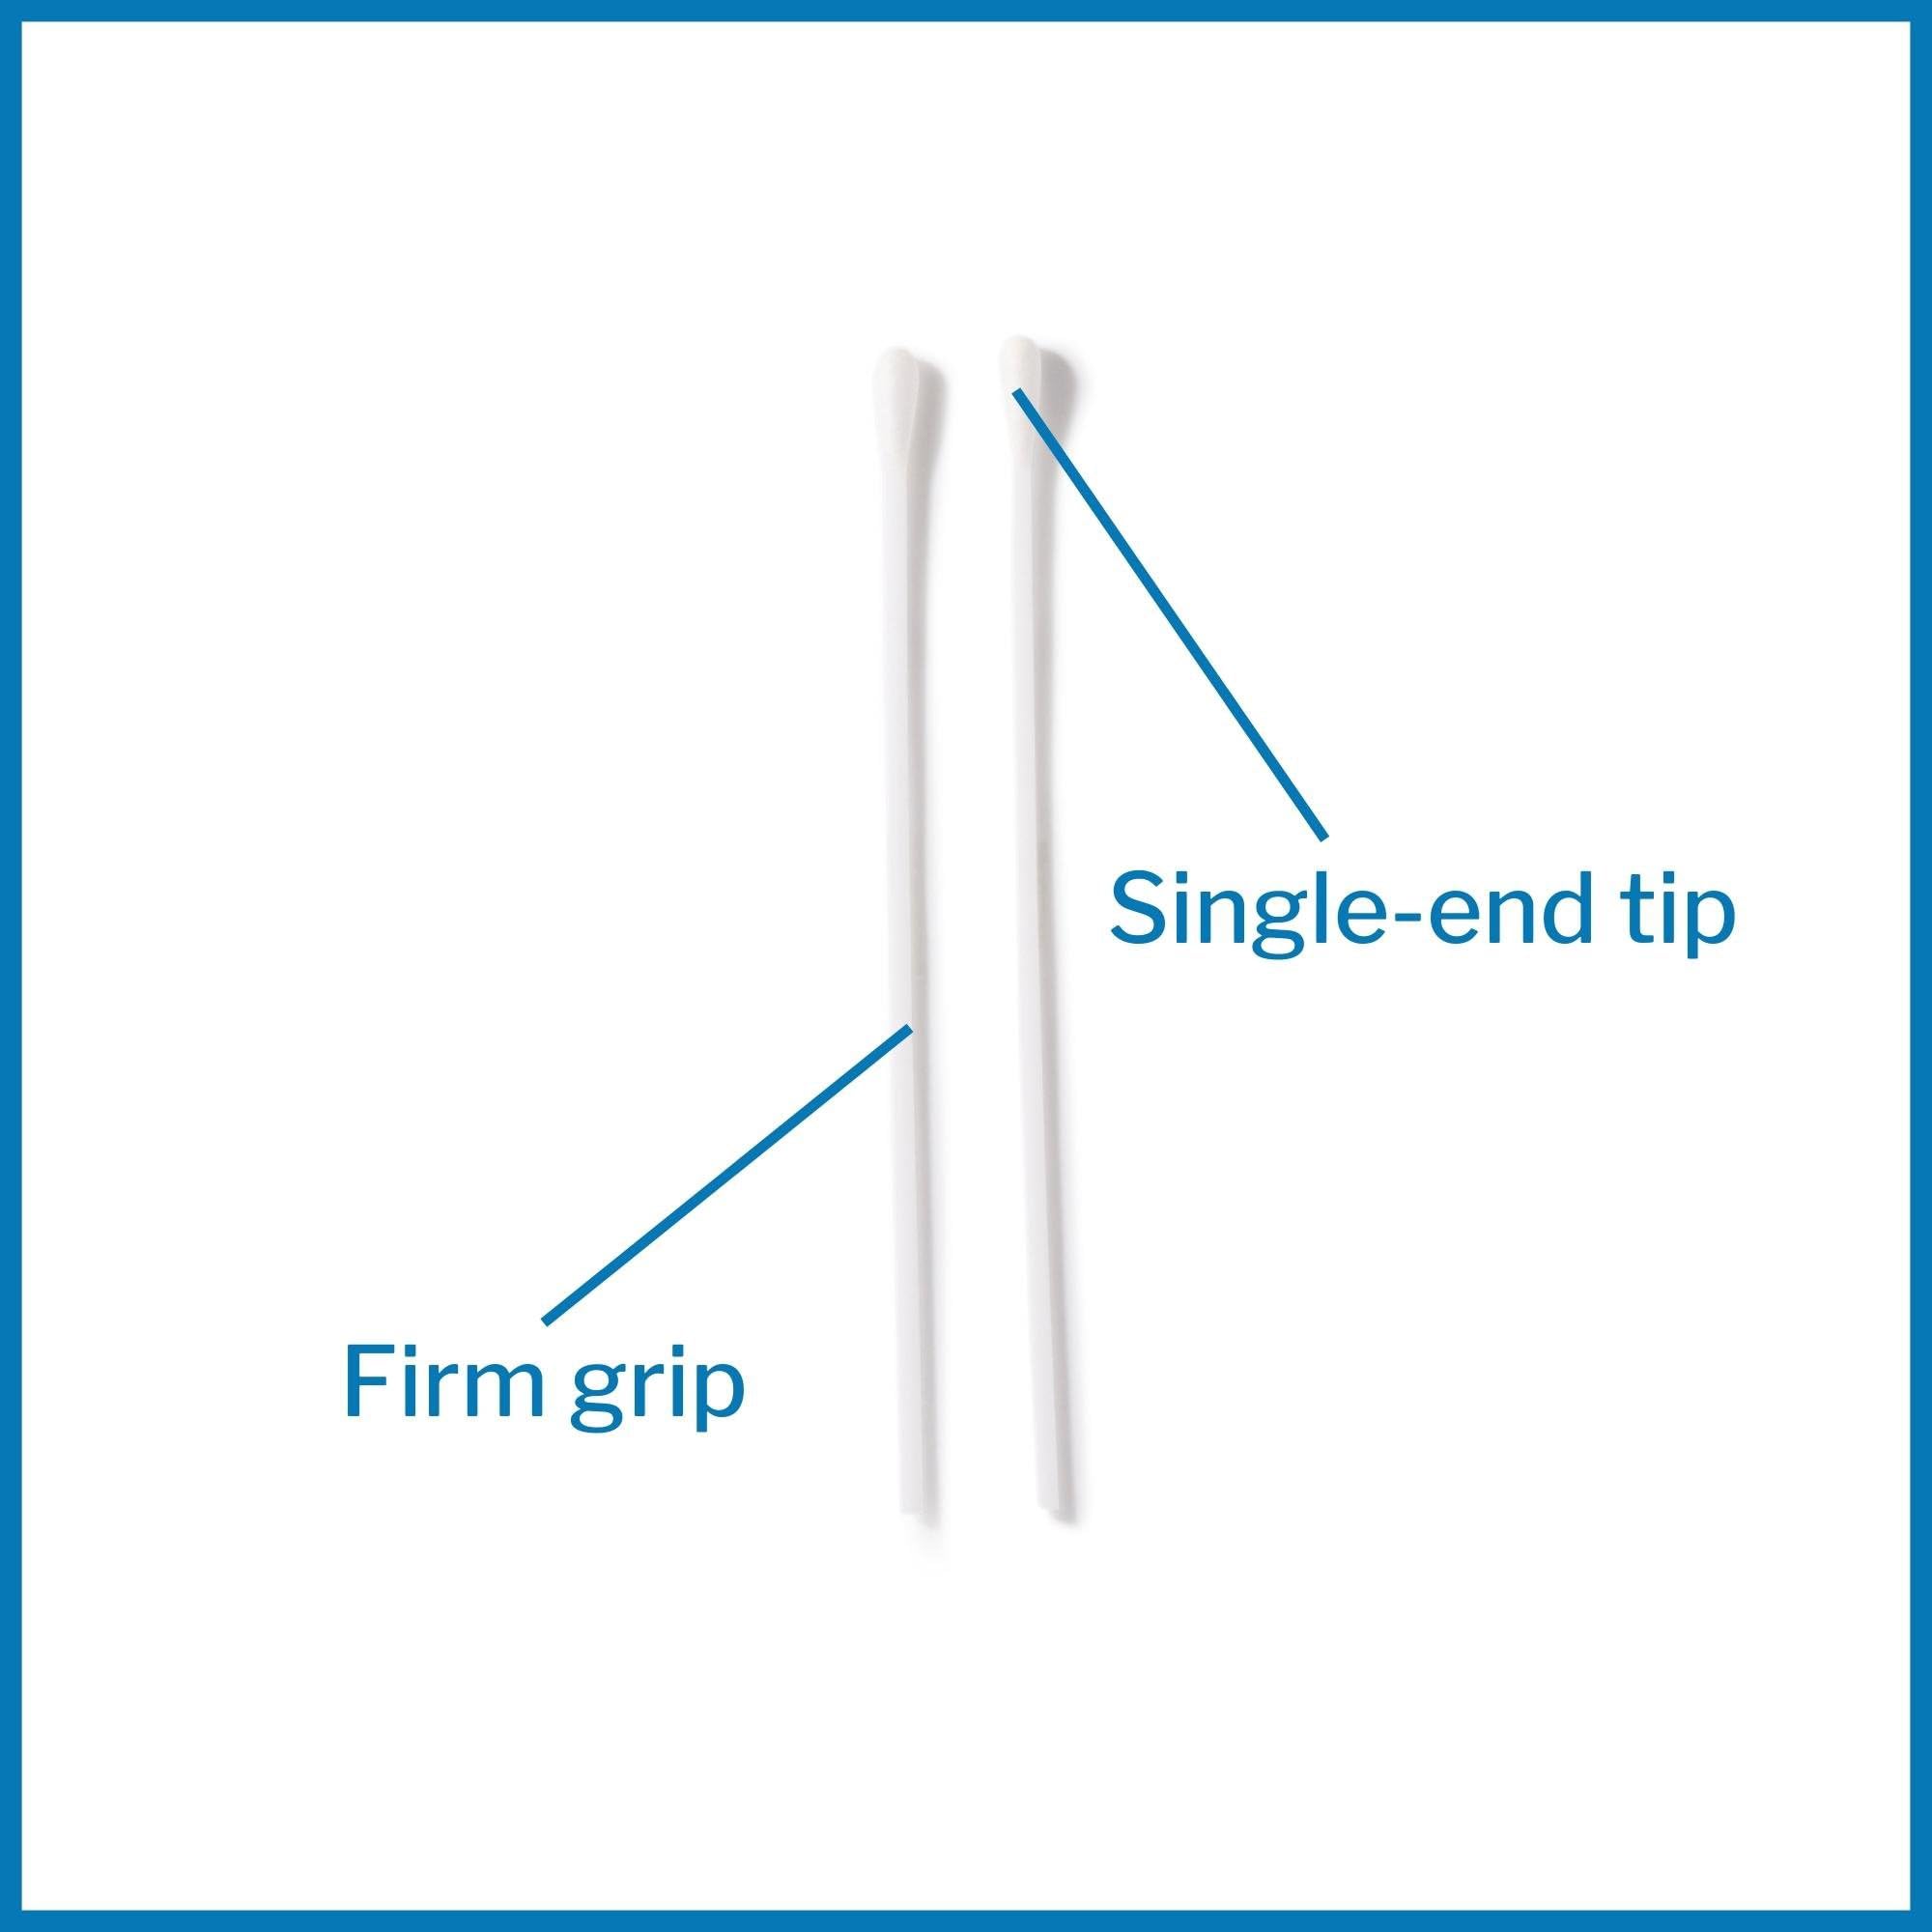 McKesson Cotton Tipped Swabs, Sterile, Individually Wrapped 2-Packs, Plastic Handle Applicator Swabsticks, 6 in, 2 Count, 100 Packs, 200 Total